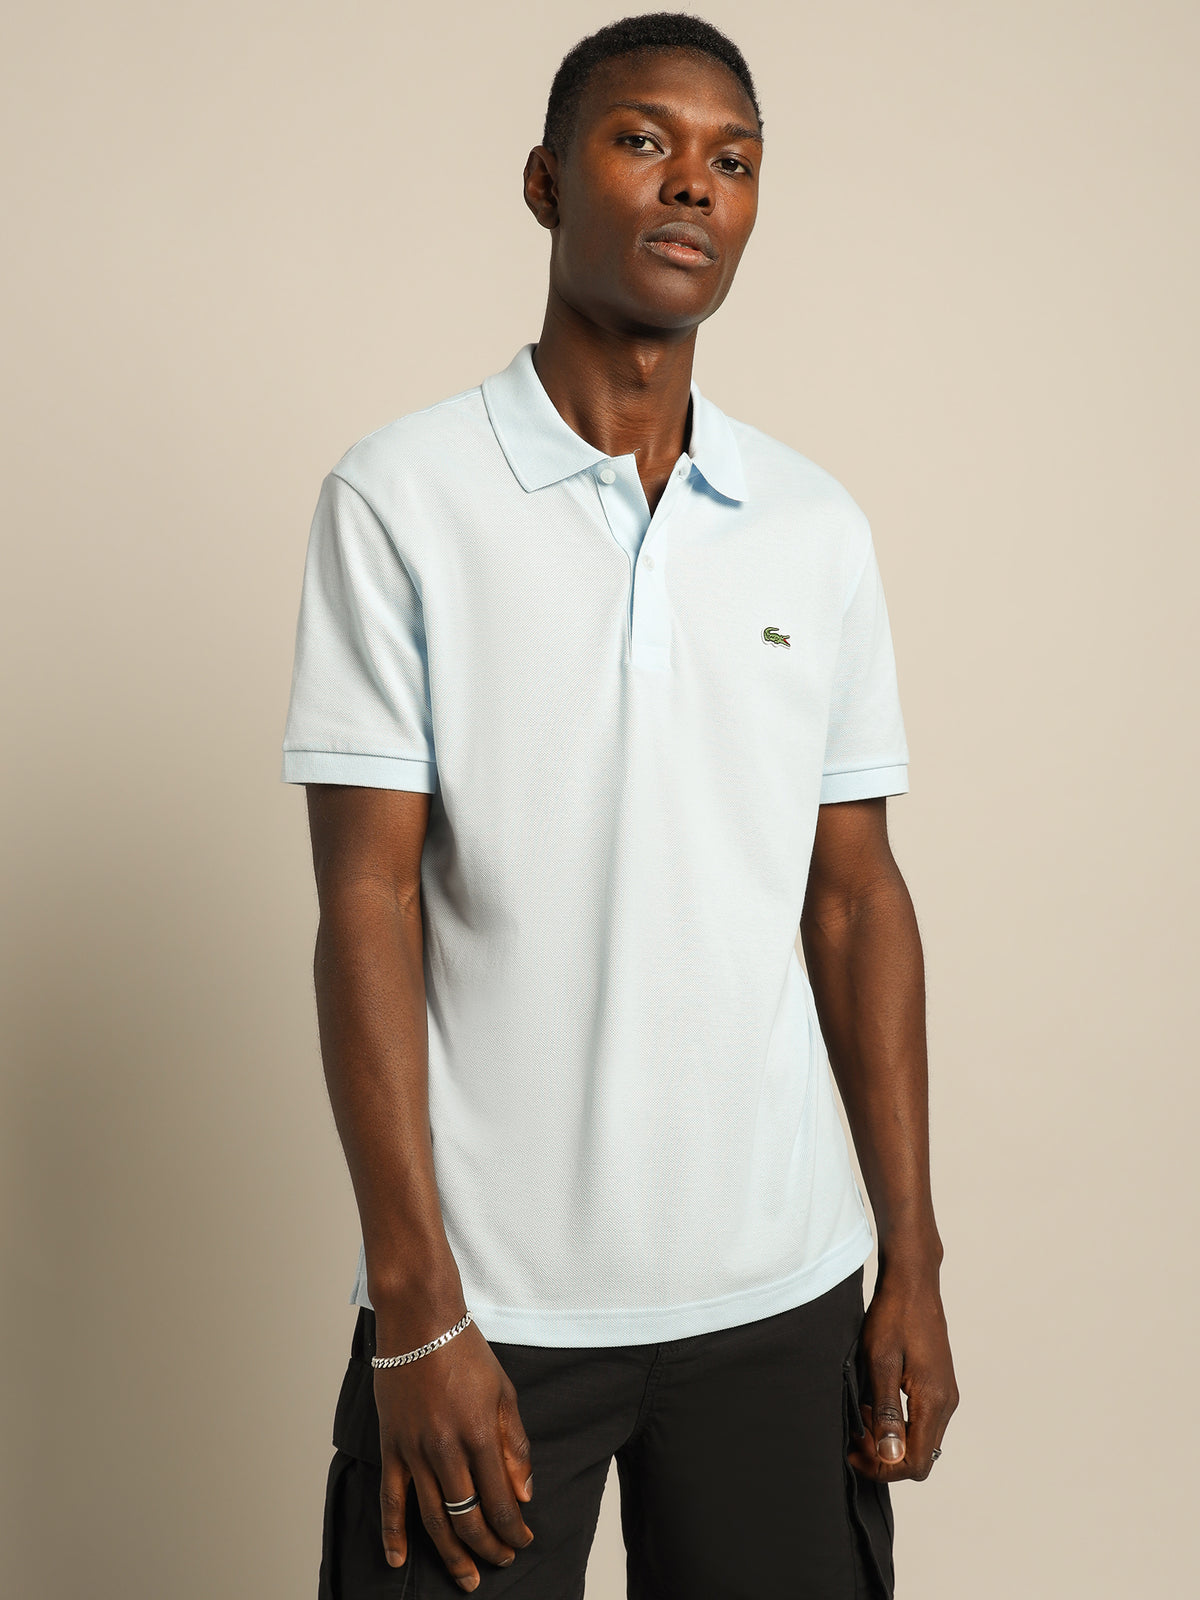 Slim Fit Polo Shirt in Light Blue